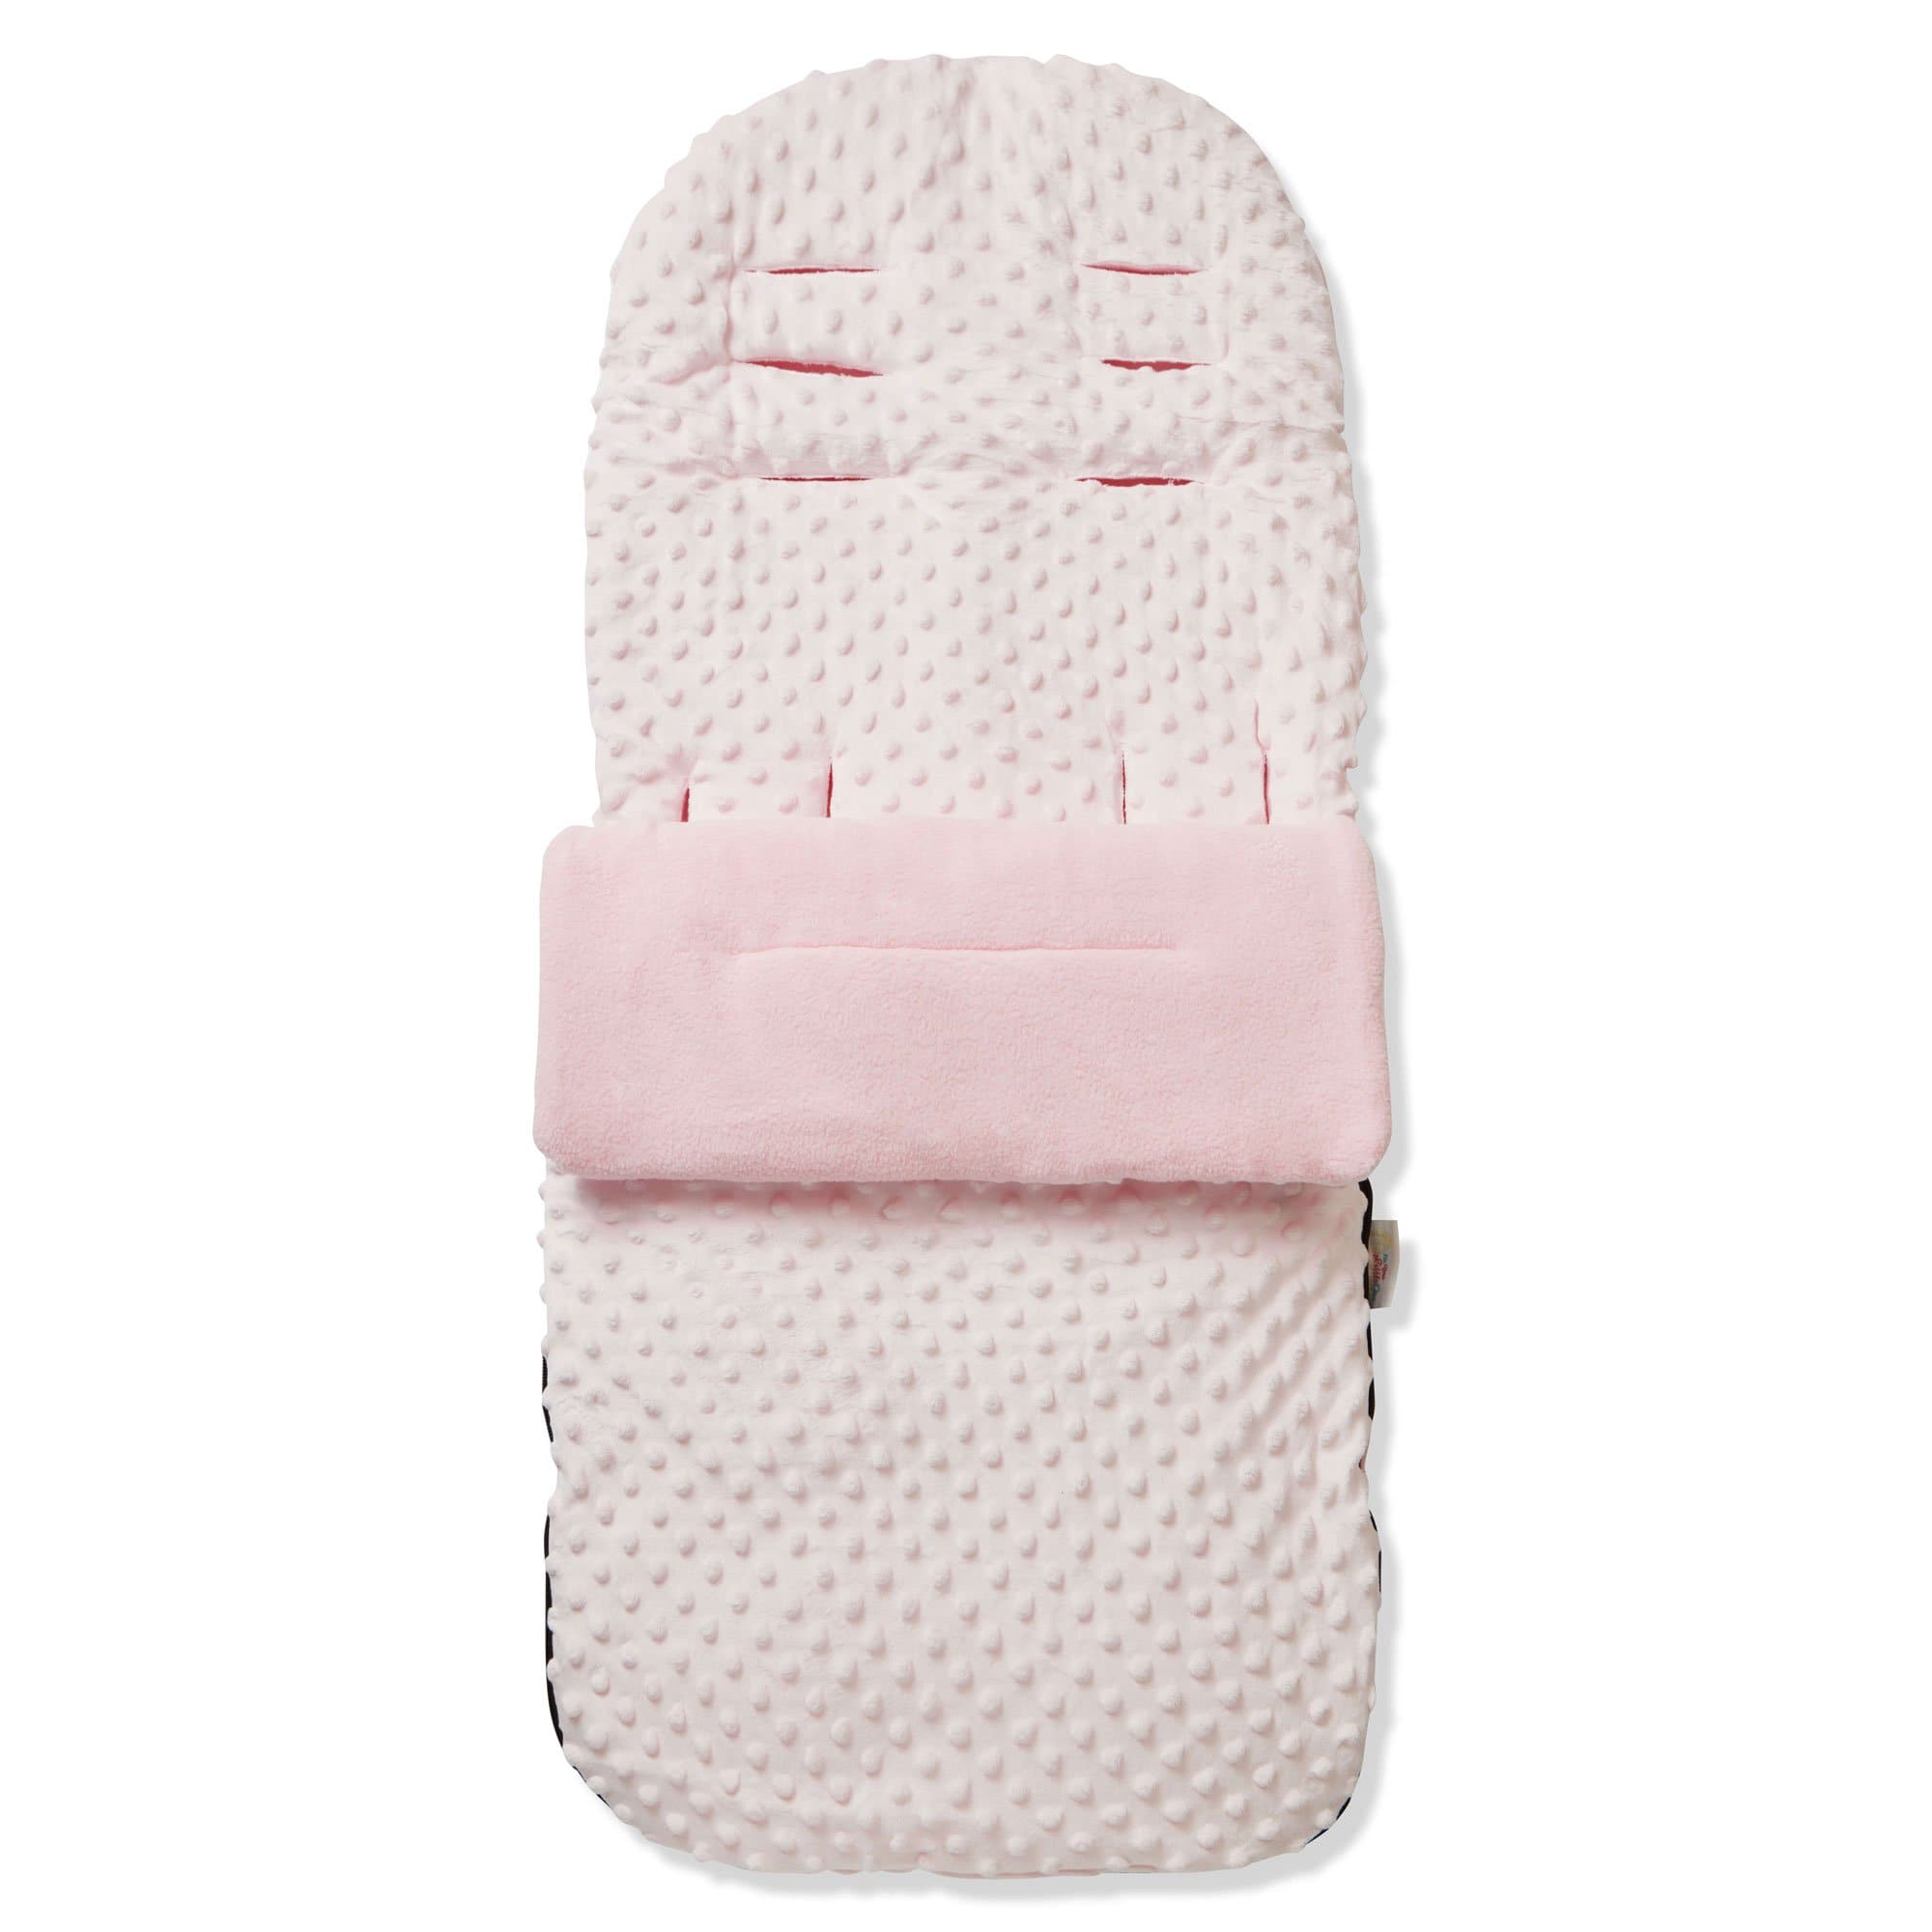 Dimple Footmuff / Cosy Toes Compatible with Hartan - Pink / Fits All Models | For Your Little One